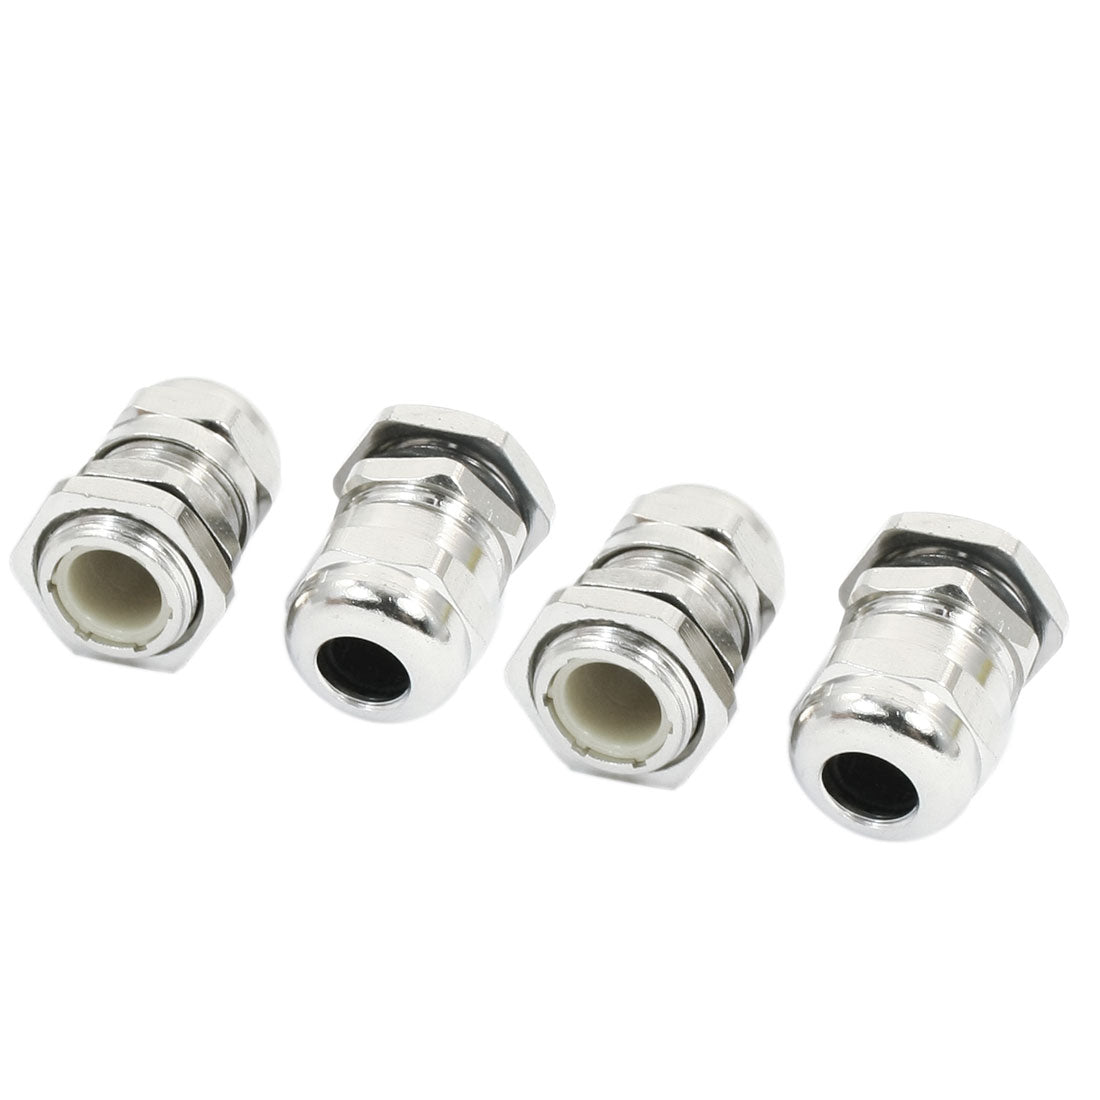 uxcell Uxcell 4 Pcs PG9 4-8mm Dia Wire Silver Tone Metal Waterproof Connector Fastener Locknut Stuffing Cable Gland